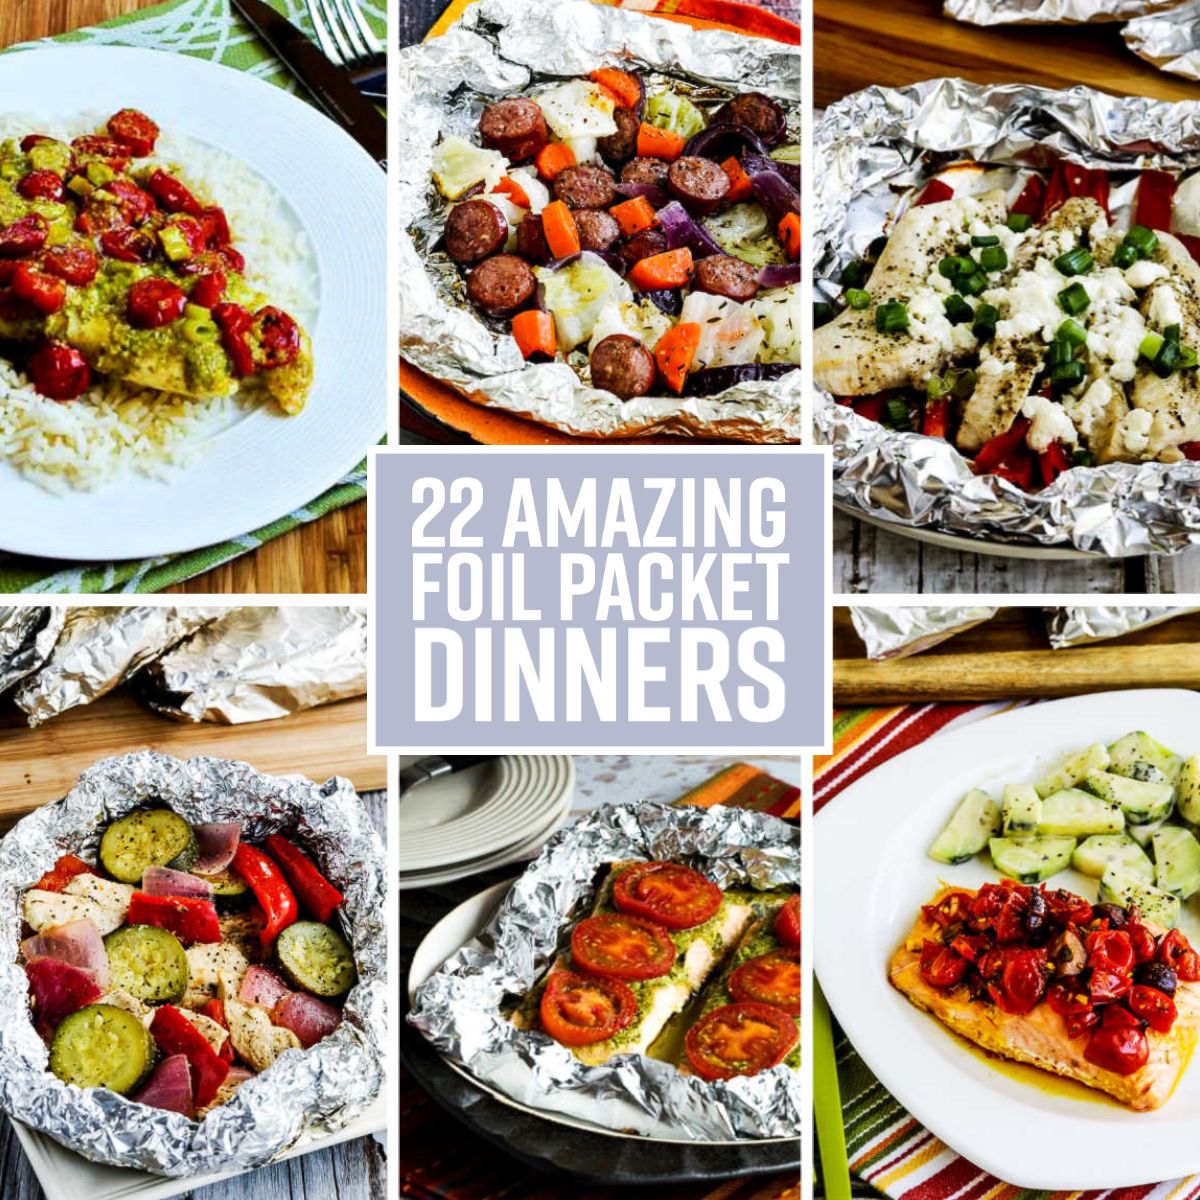 22 Amazing Foil Packet Dinners text overlay collage showing featured recipes.